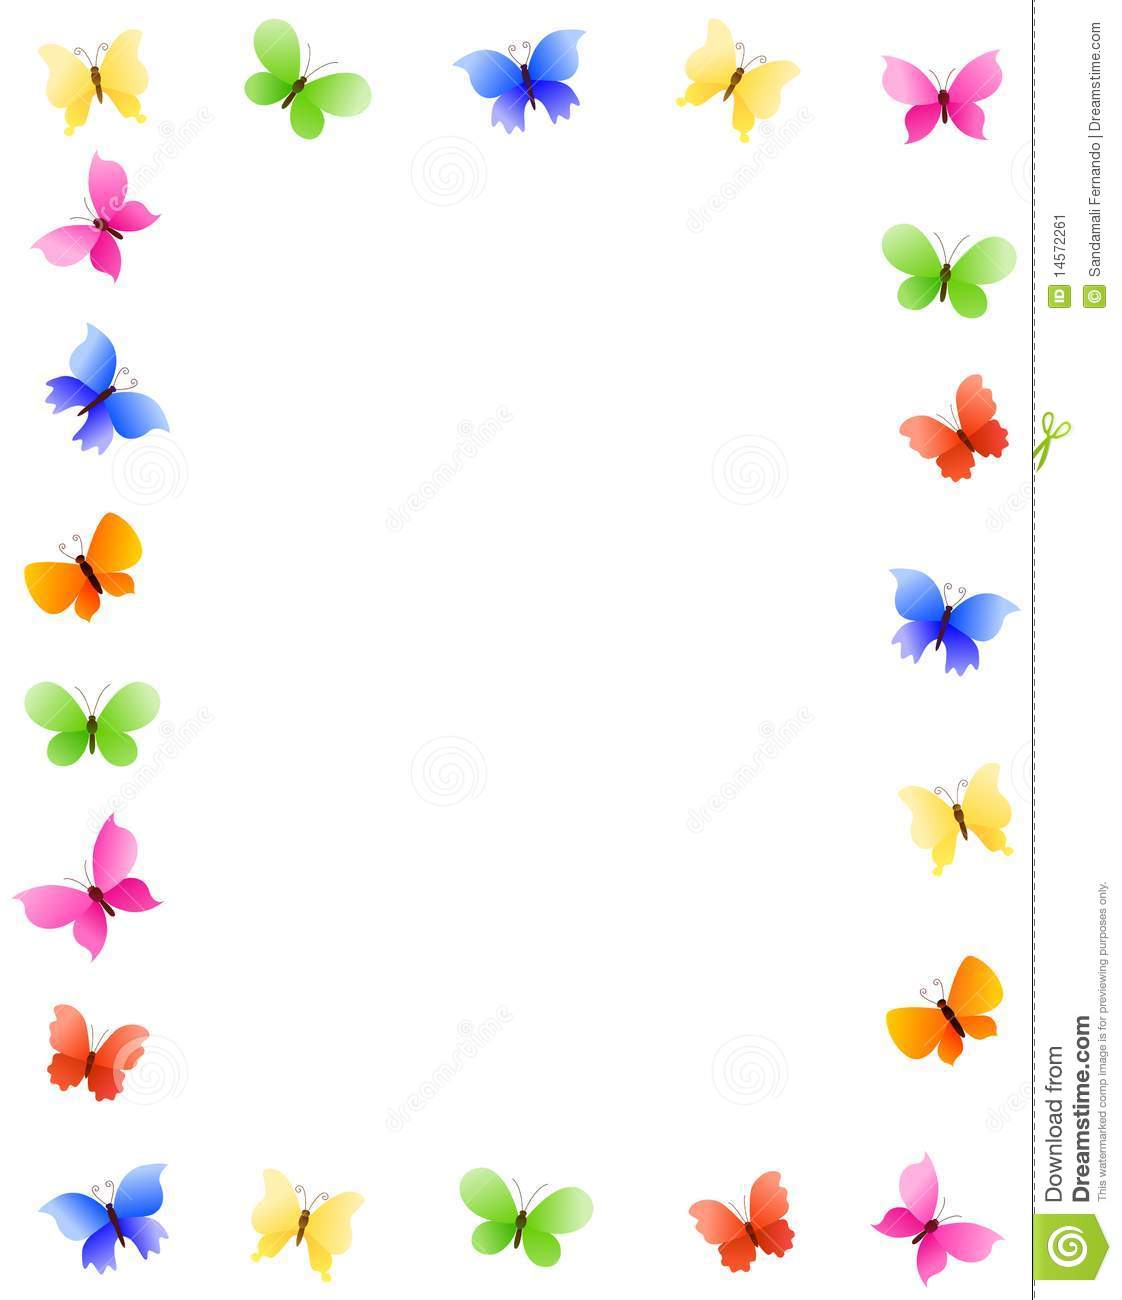 Colorful Butterflies Border   Frame   Background